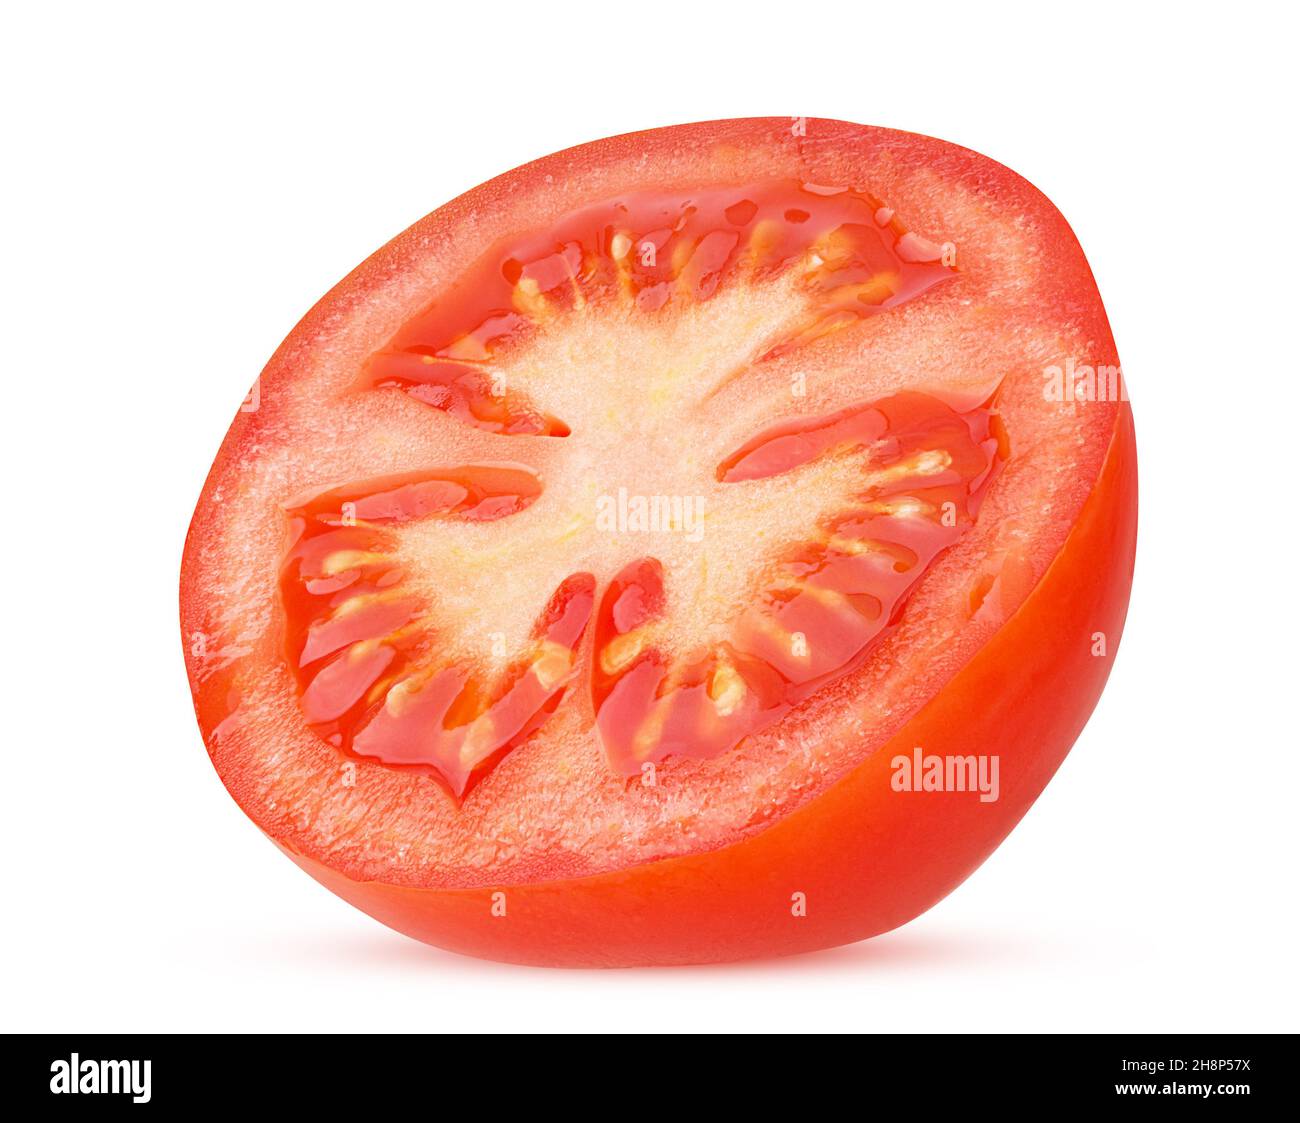 Fresh red tomato cut in half isolated on white background Clipping Path. Full depth of field. Stock Photo